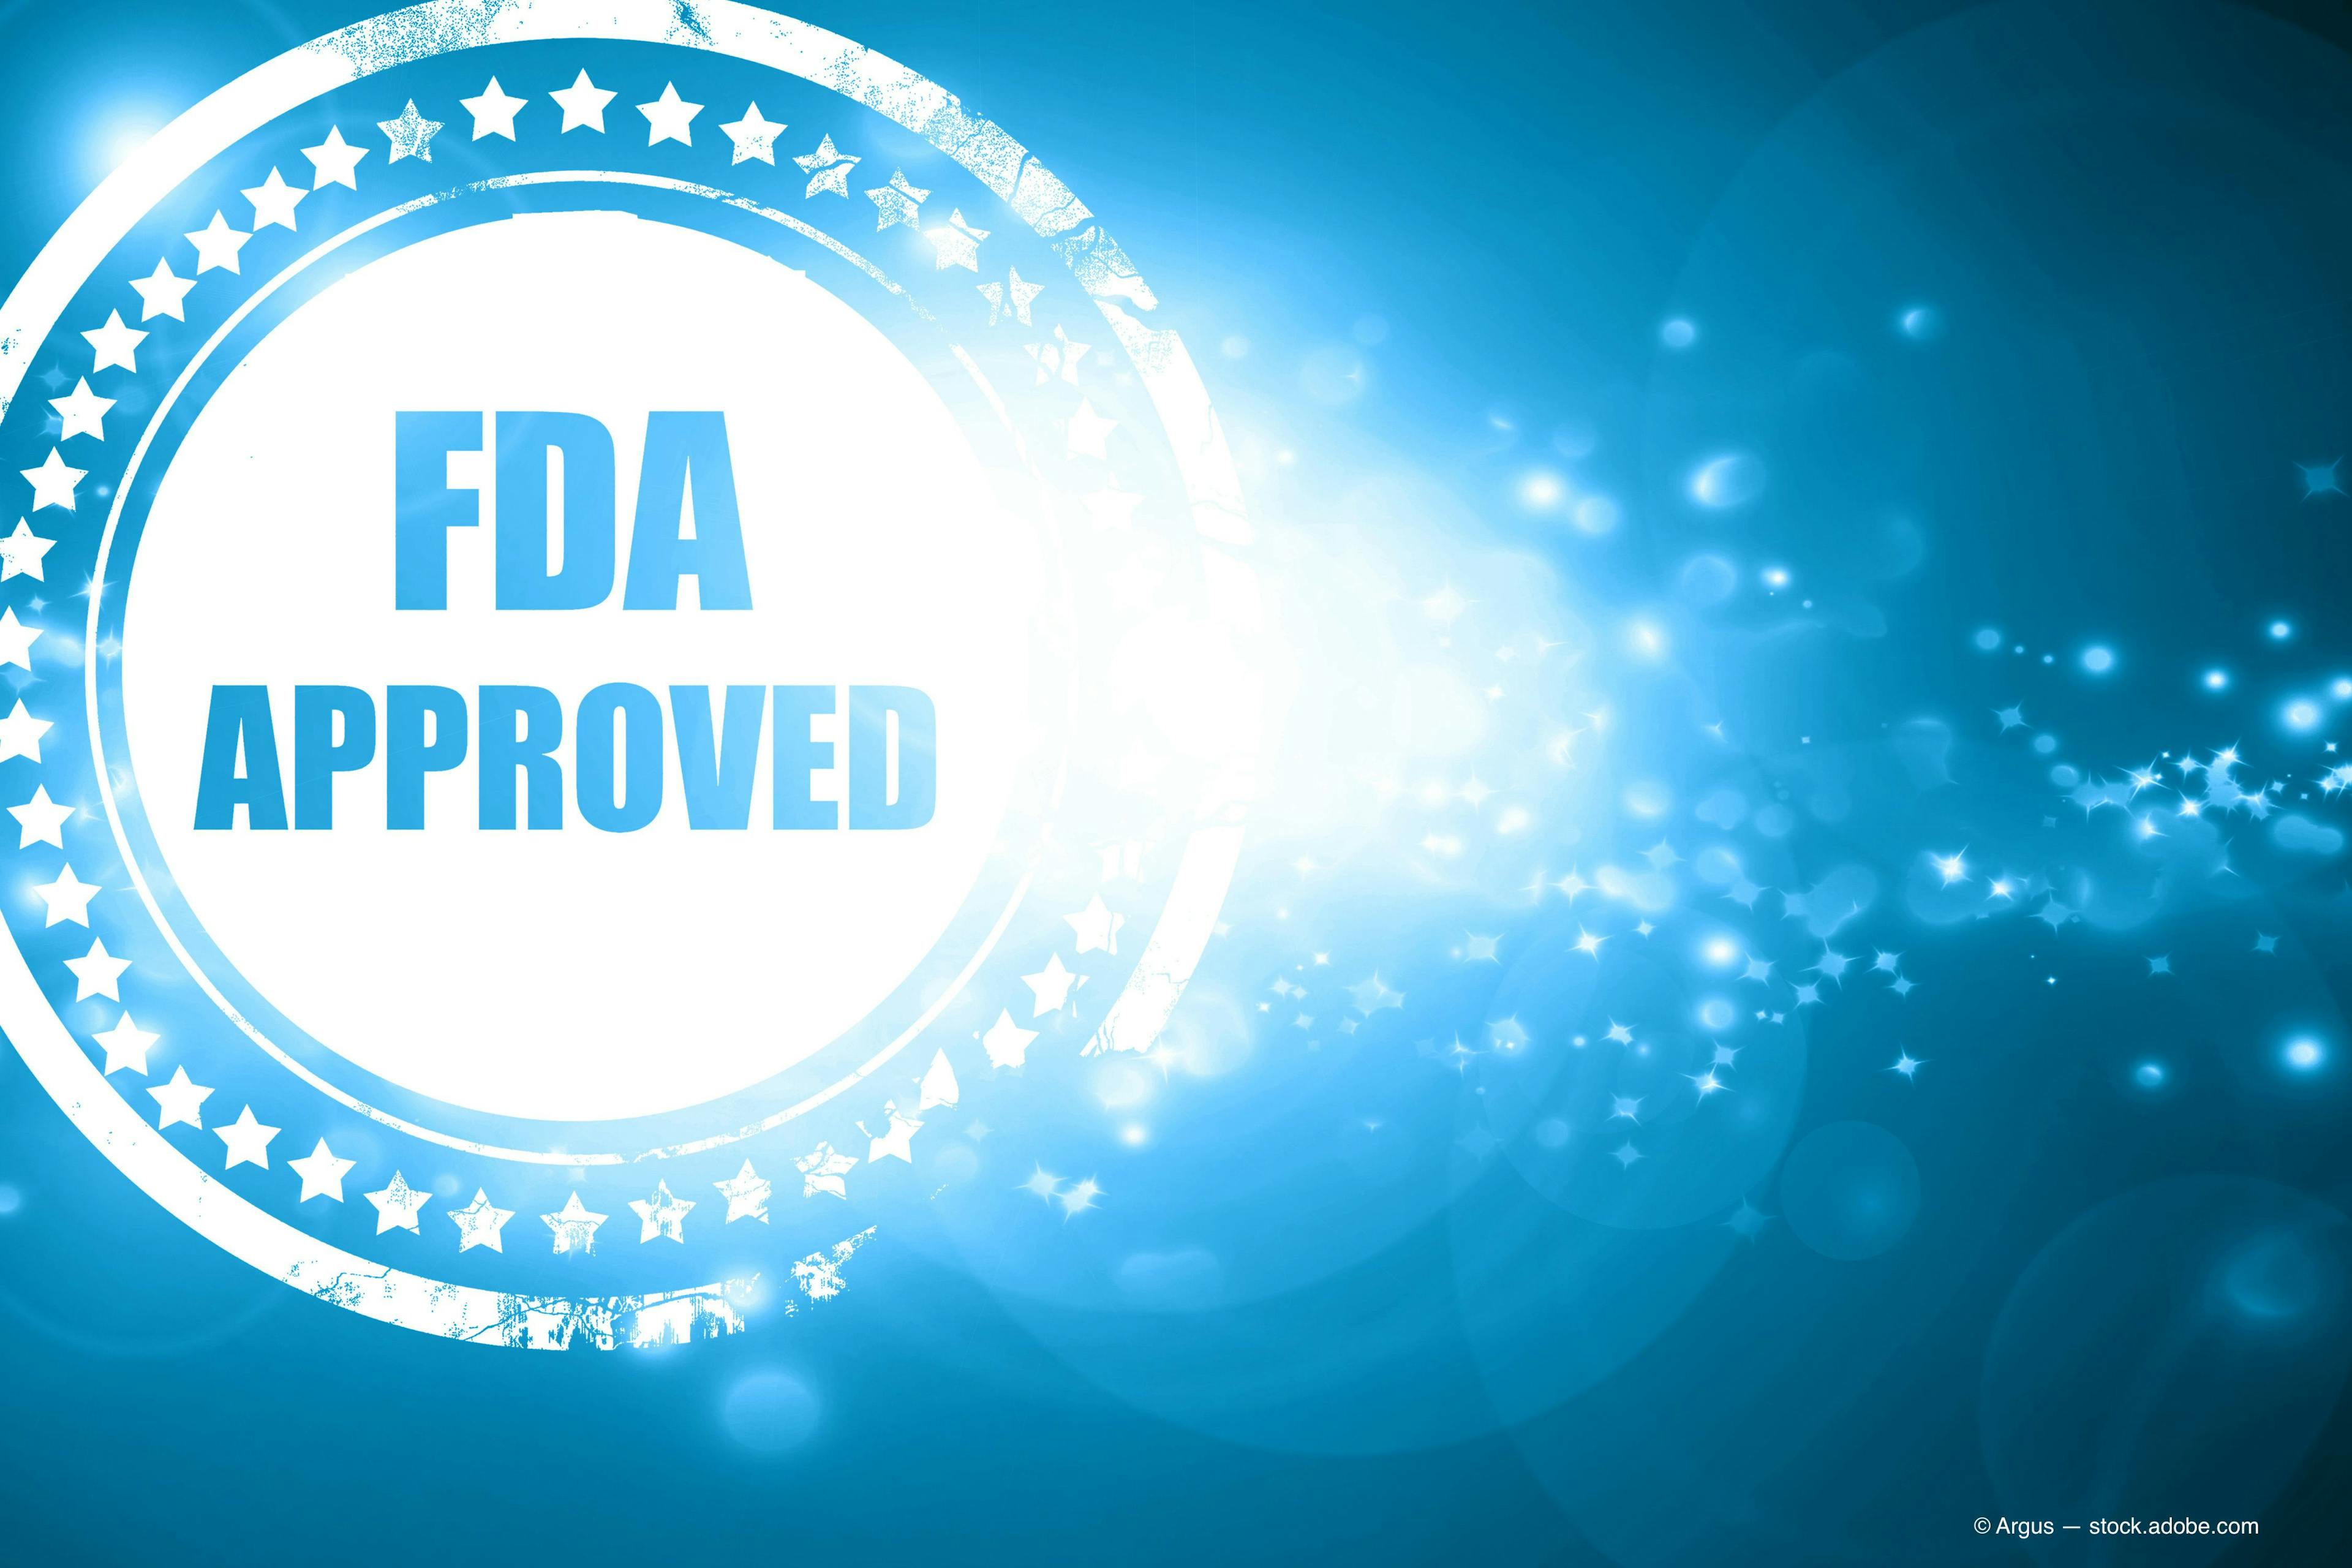 The FDA announced approval of the first generic version of Restasis (cyclosporine ophthalmic emulsion) 0.05% eye drops Thursday.